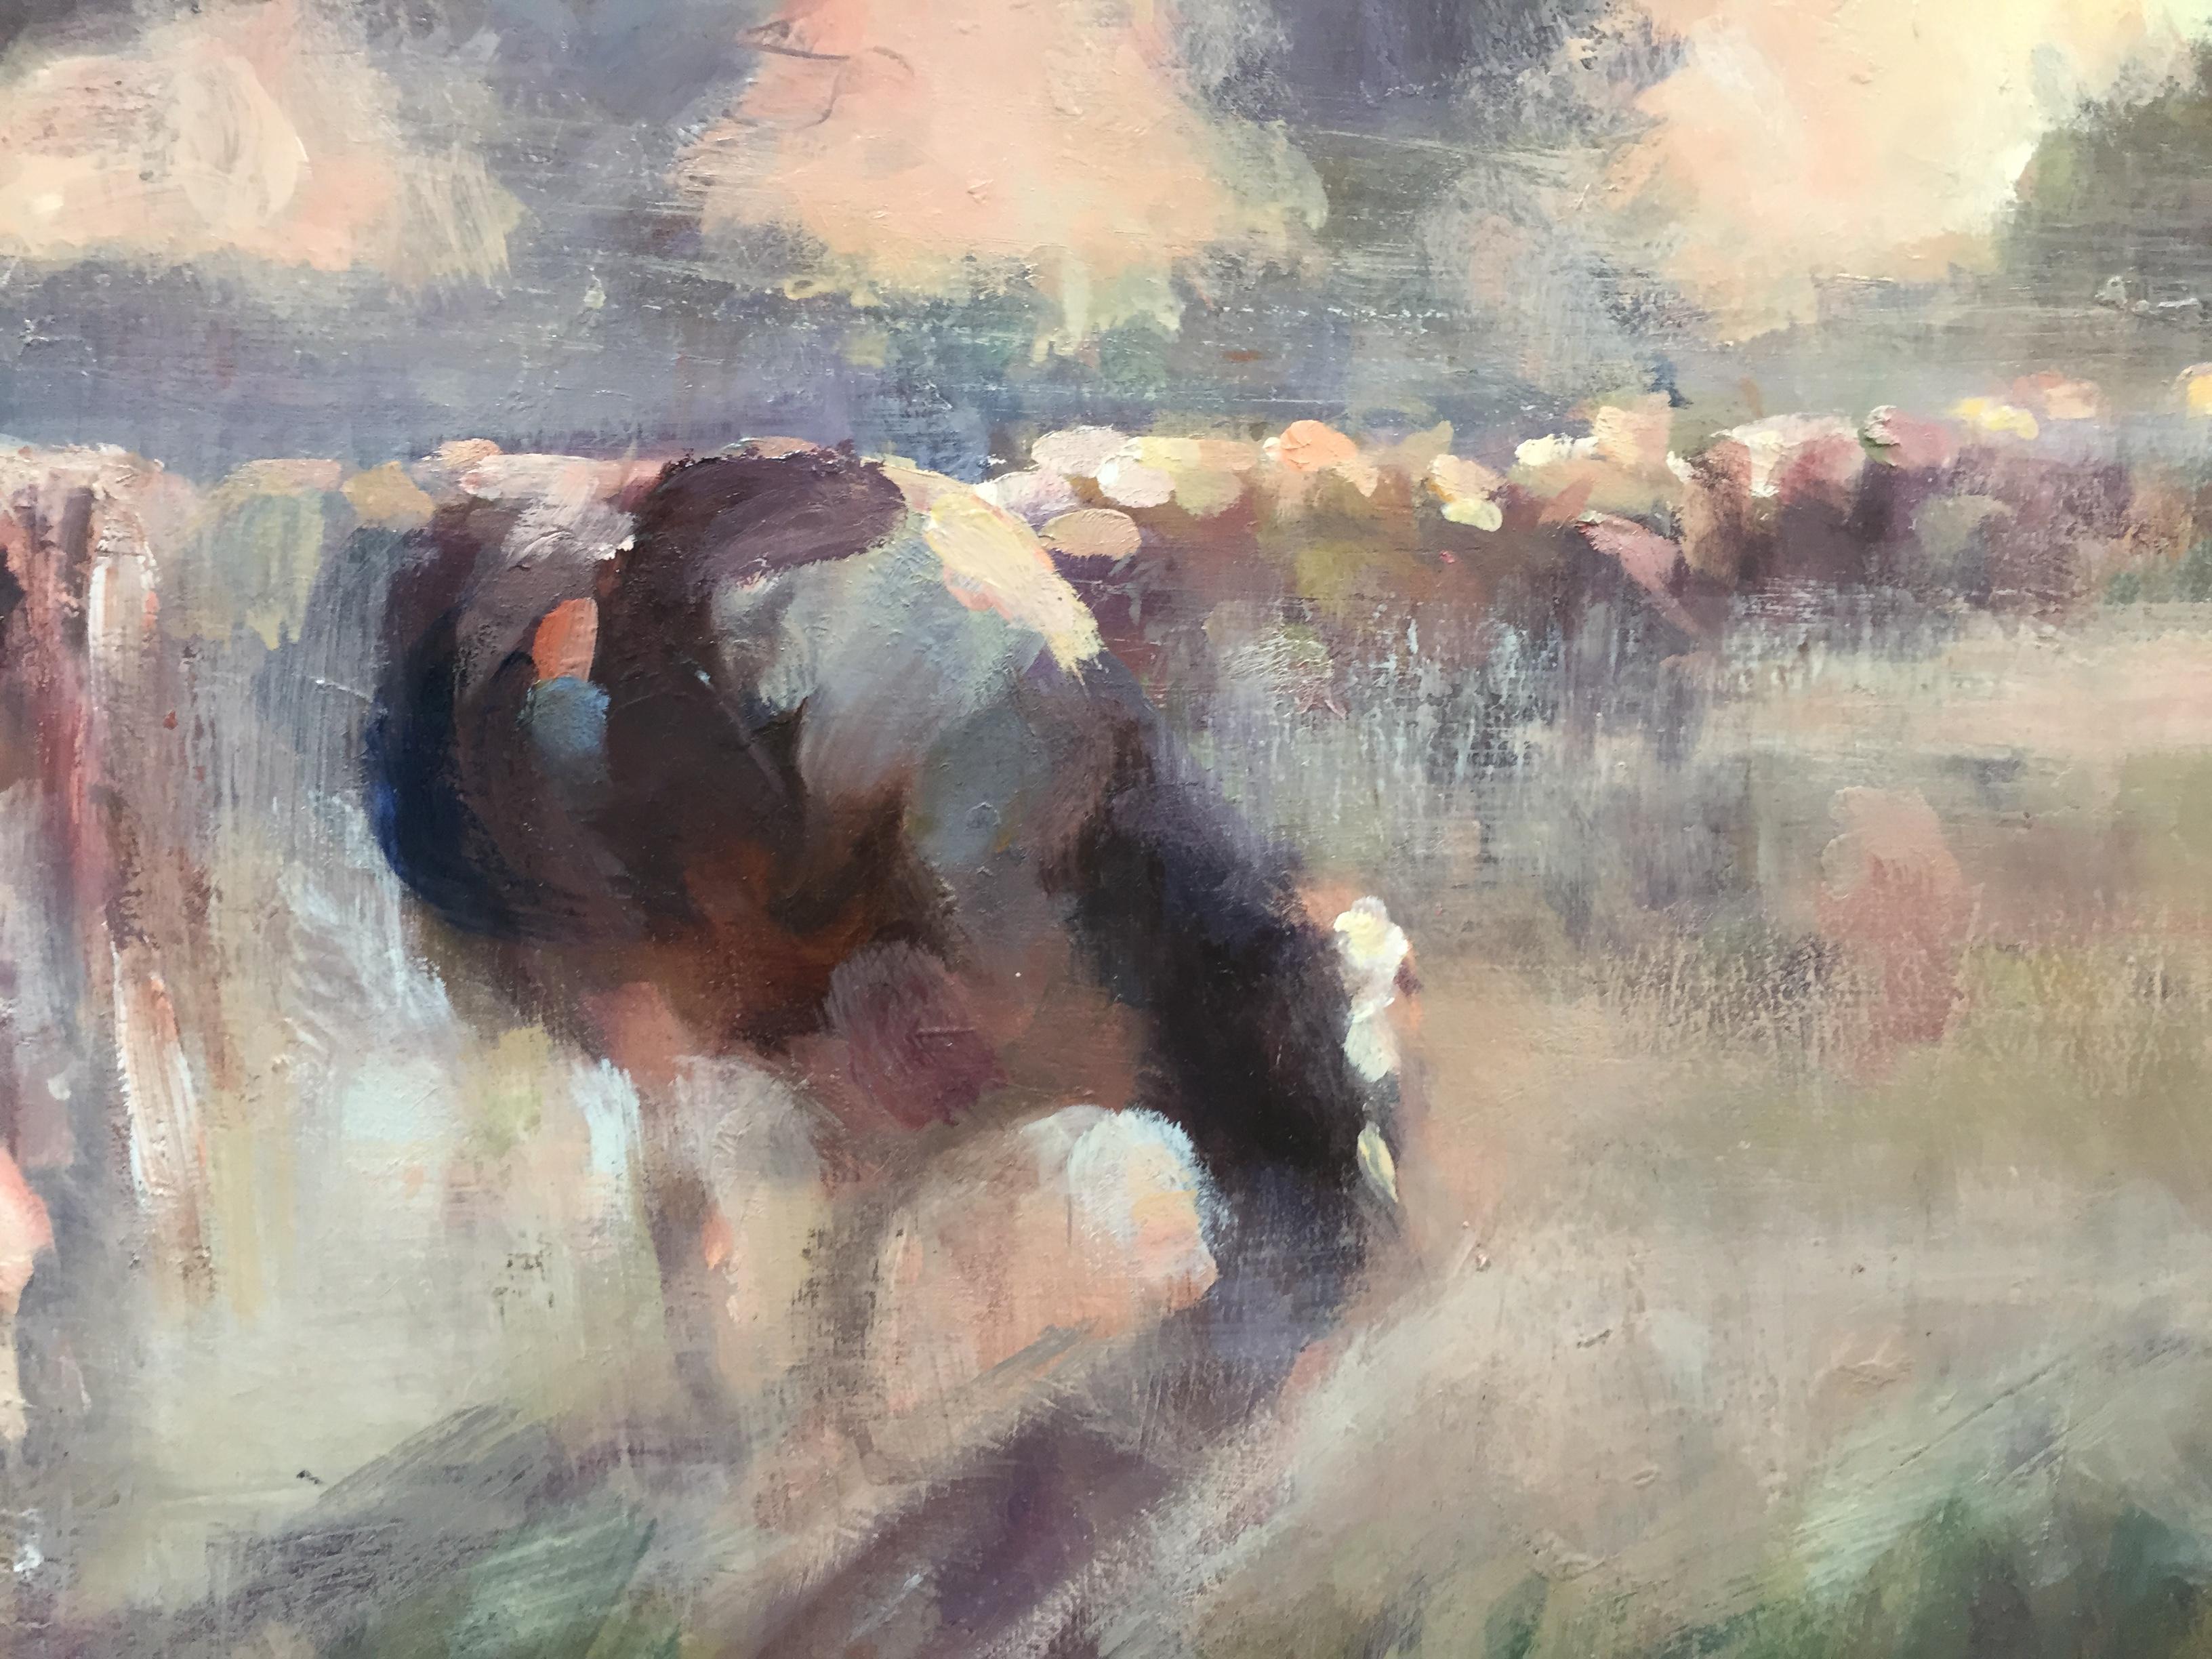 Cows in the Morning-21st Century Contemporary Dutch Landscape Painting 2